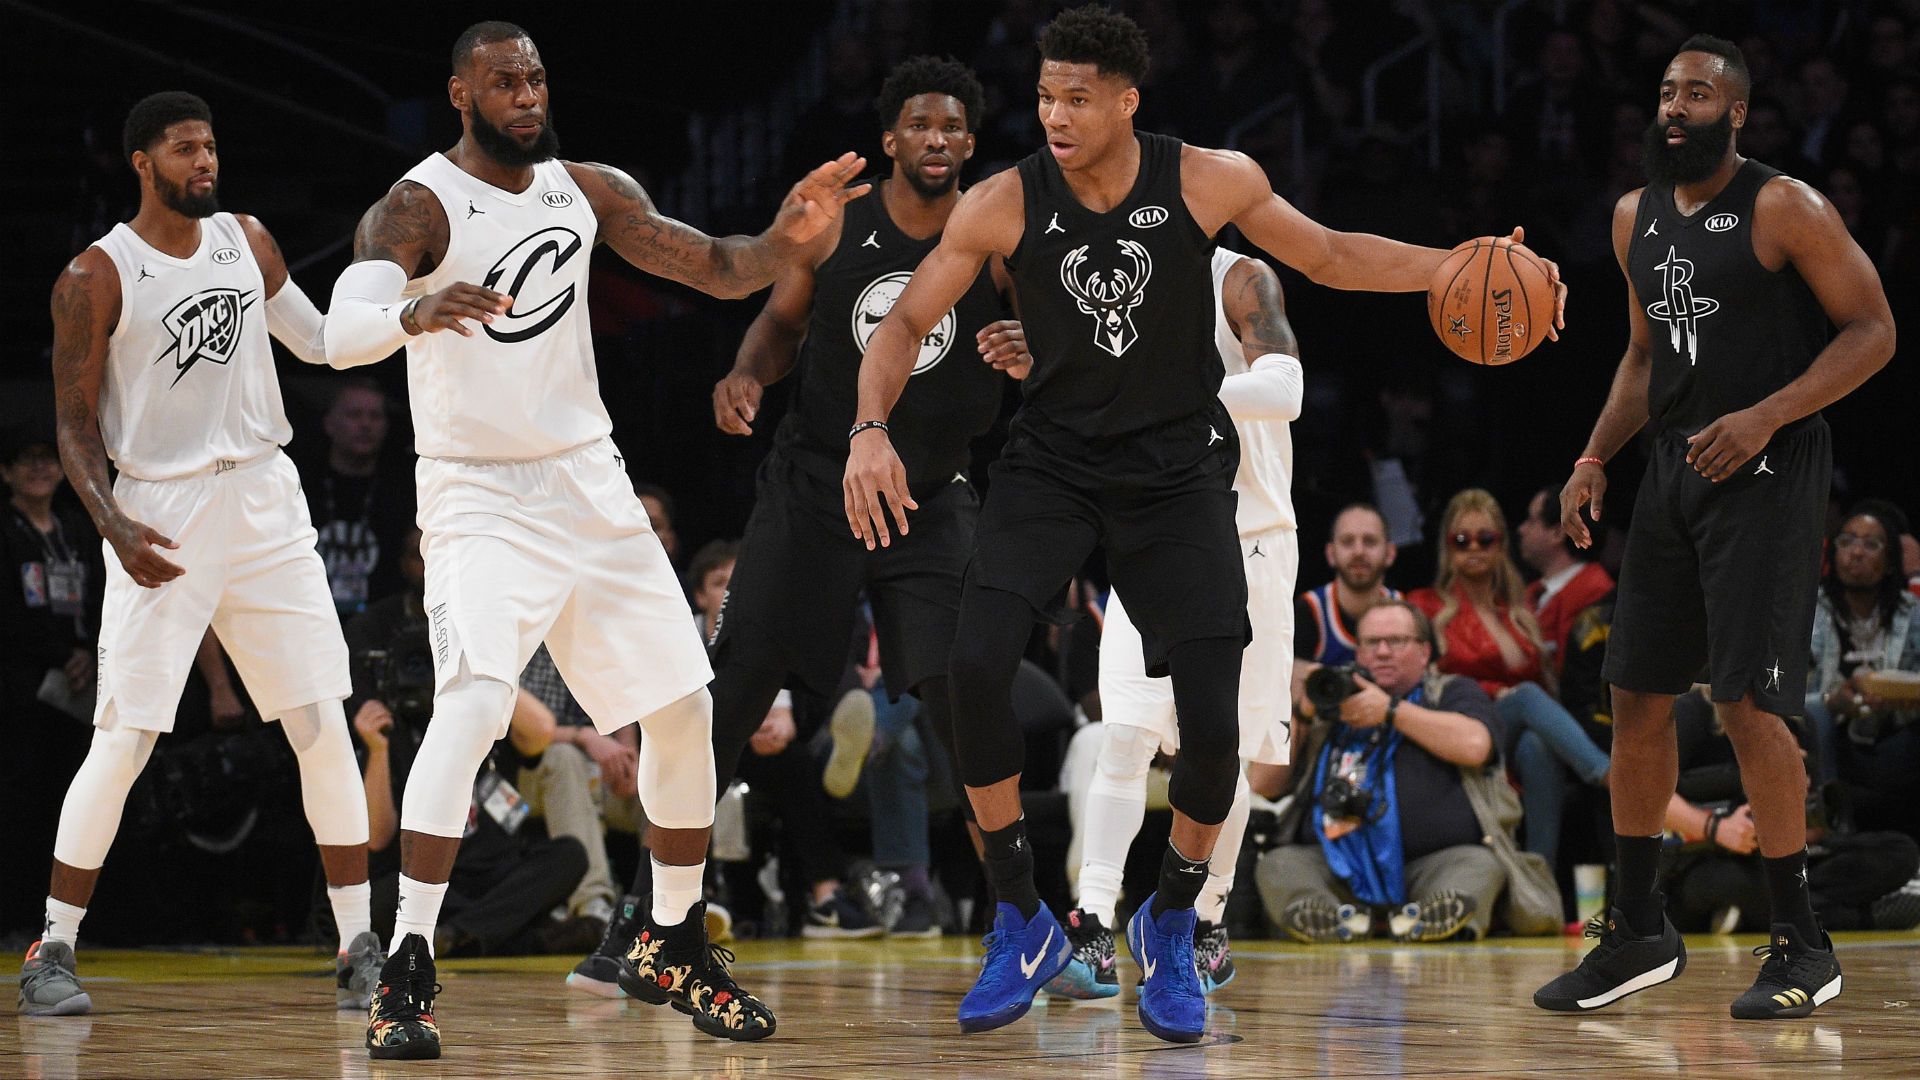 NBA All Star Draft 2019: Date, Time, Format, TV Channel, Live